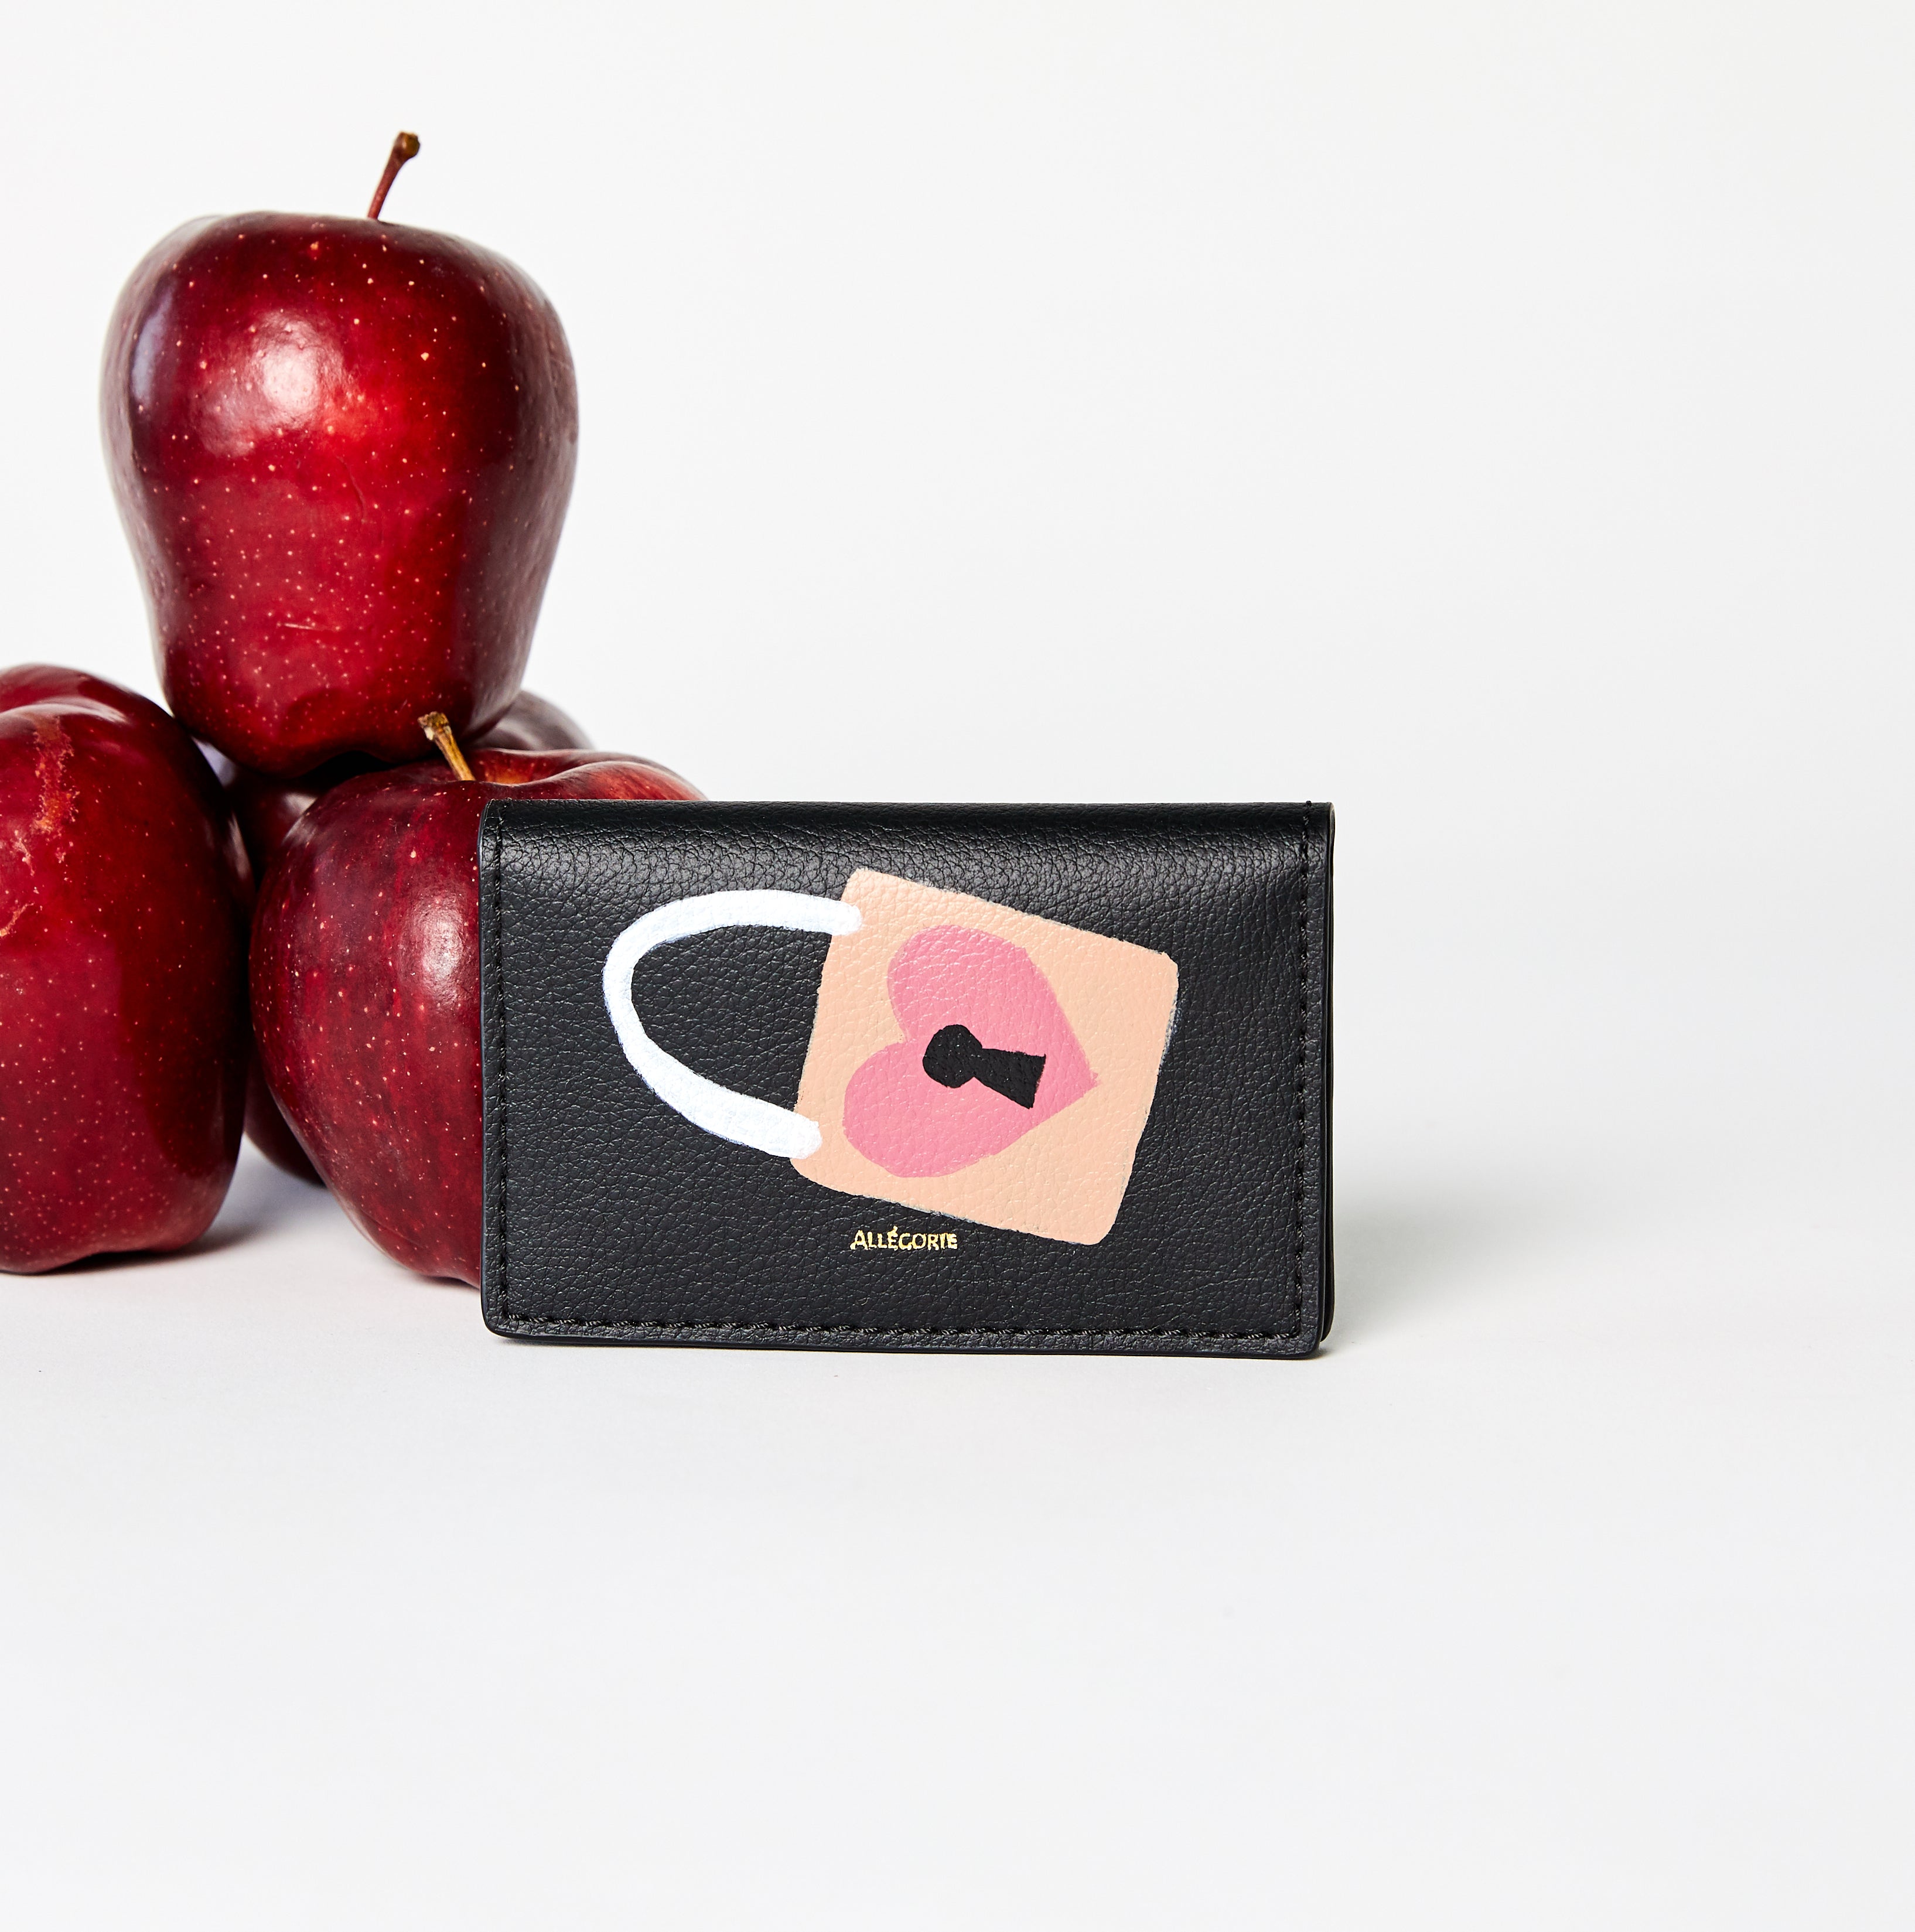 hand painted cardholder by LGBTQA+ artist on vegan sustainable materials